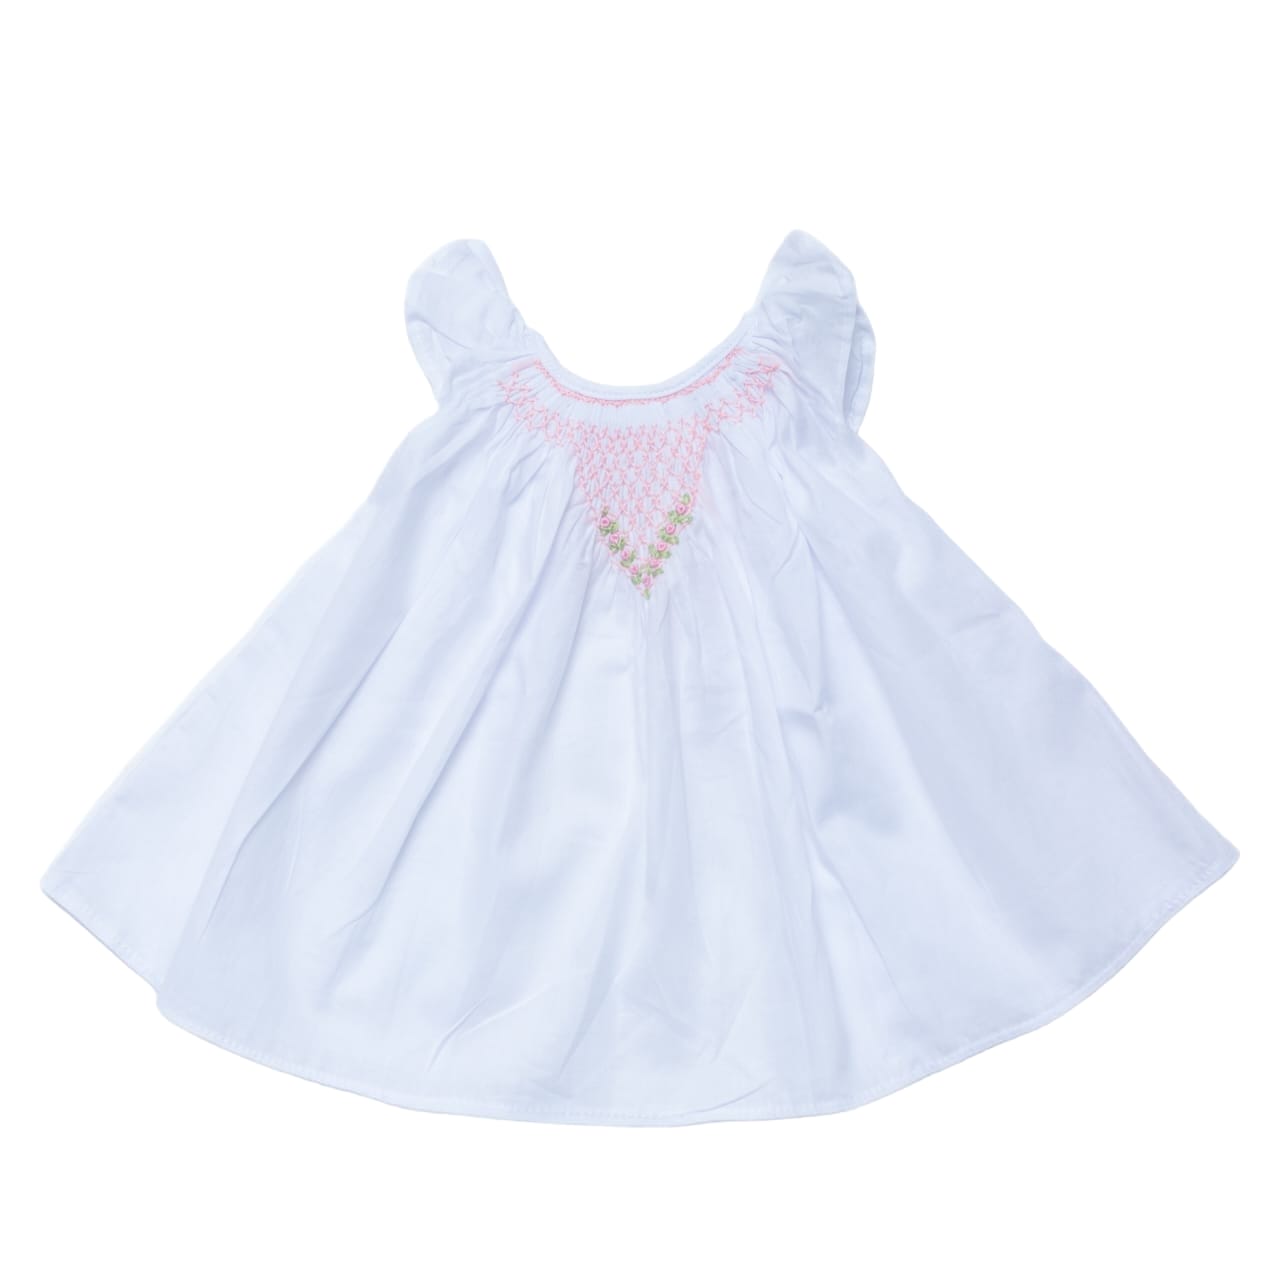 Baby Dress - Pink Embroidered